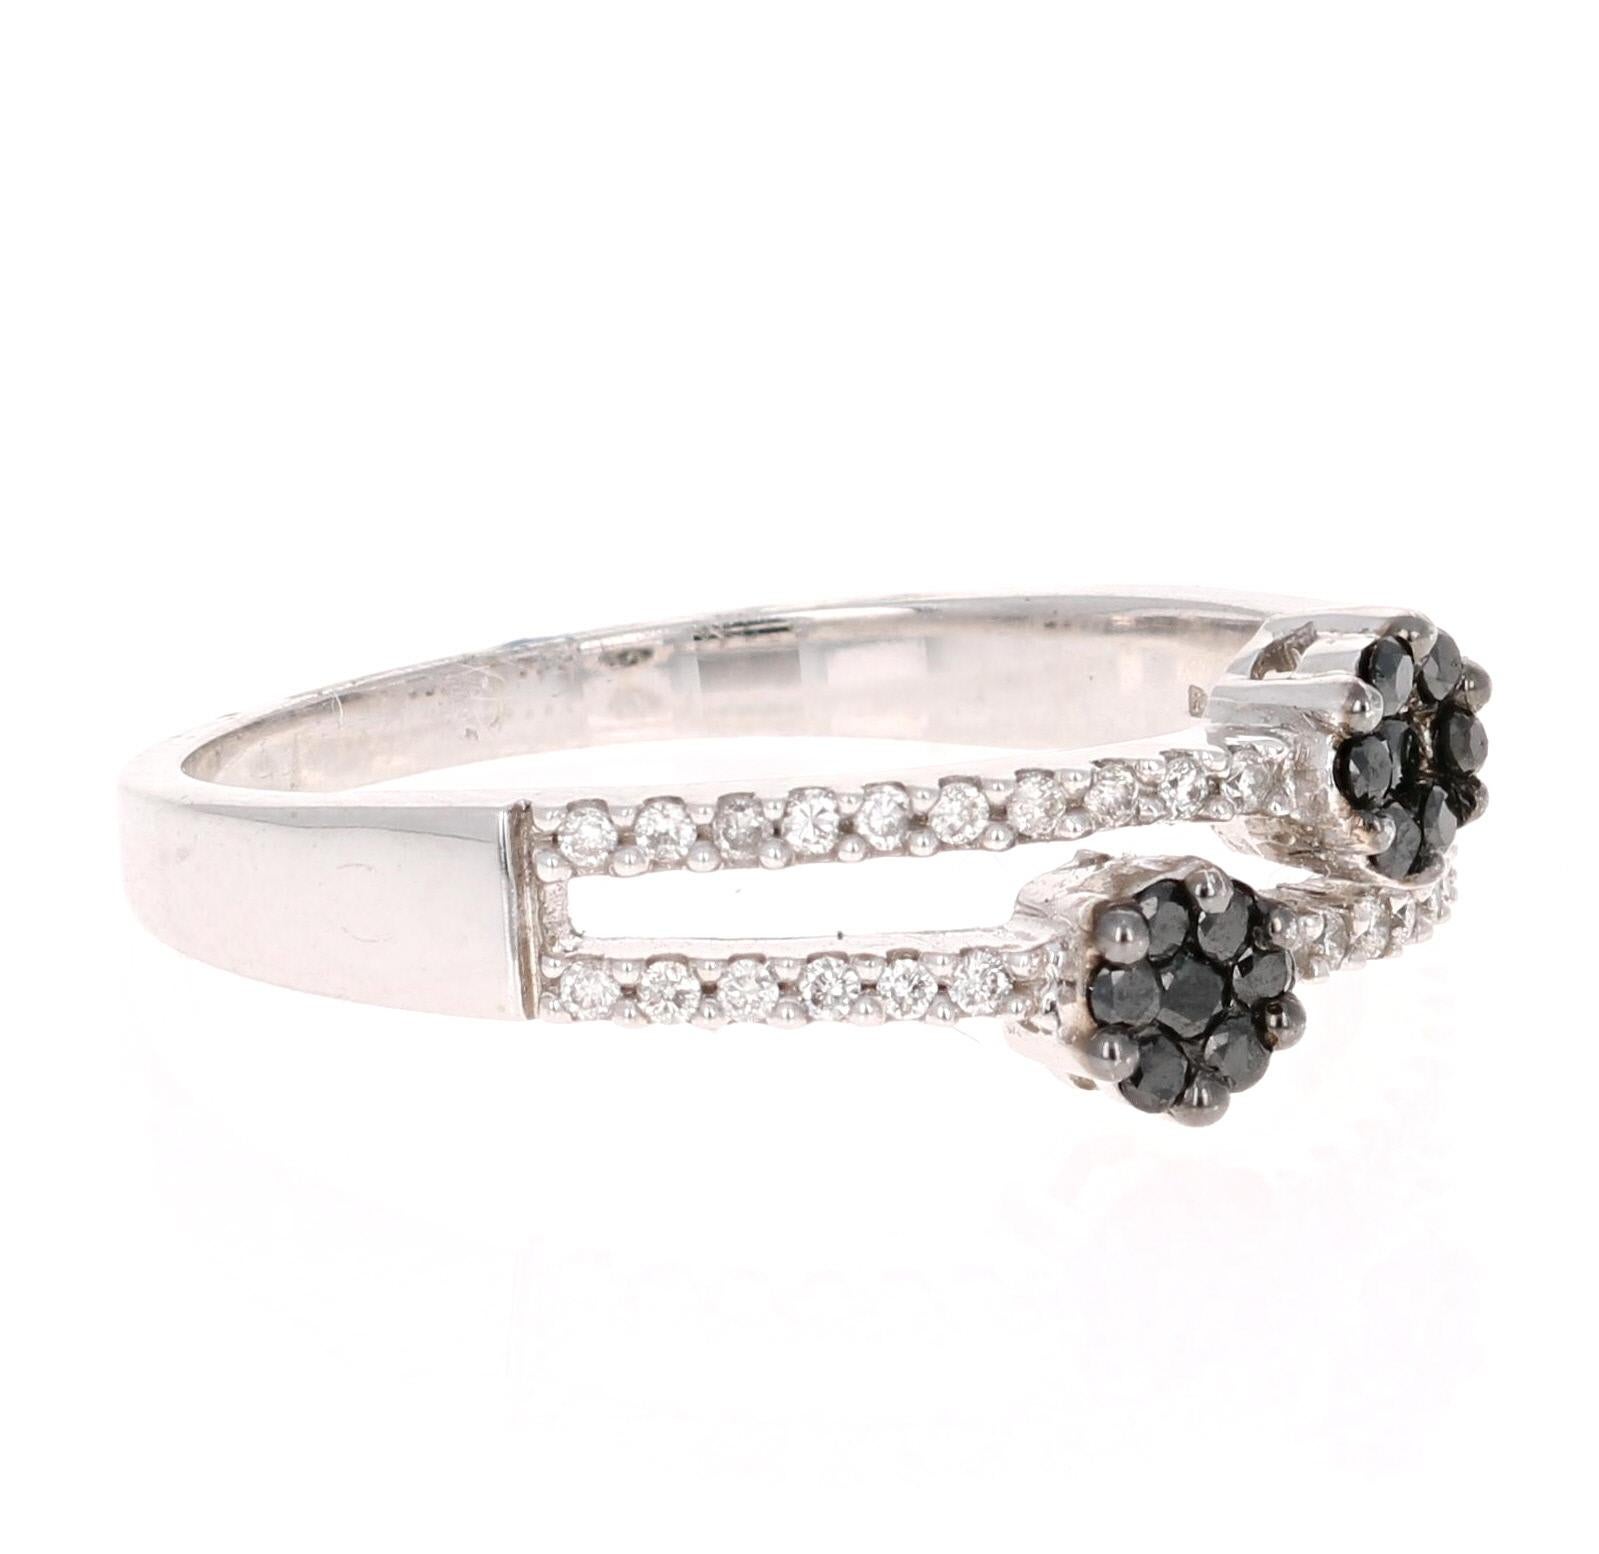 A simple everyday black and white flower ring! This classic design is going to compliment almost anything in your wardrobe and can be a cute add on to other rings on your hand! 
There are a total of 46 Round Cut Black and White Diamonds that weigh